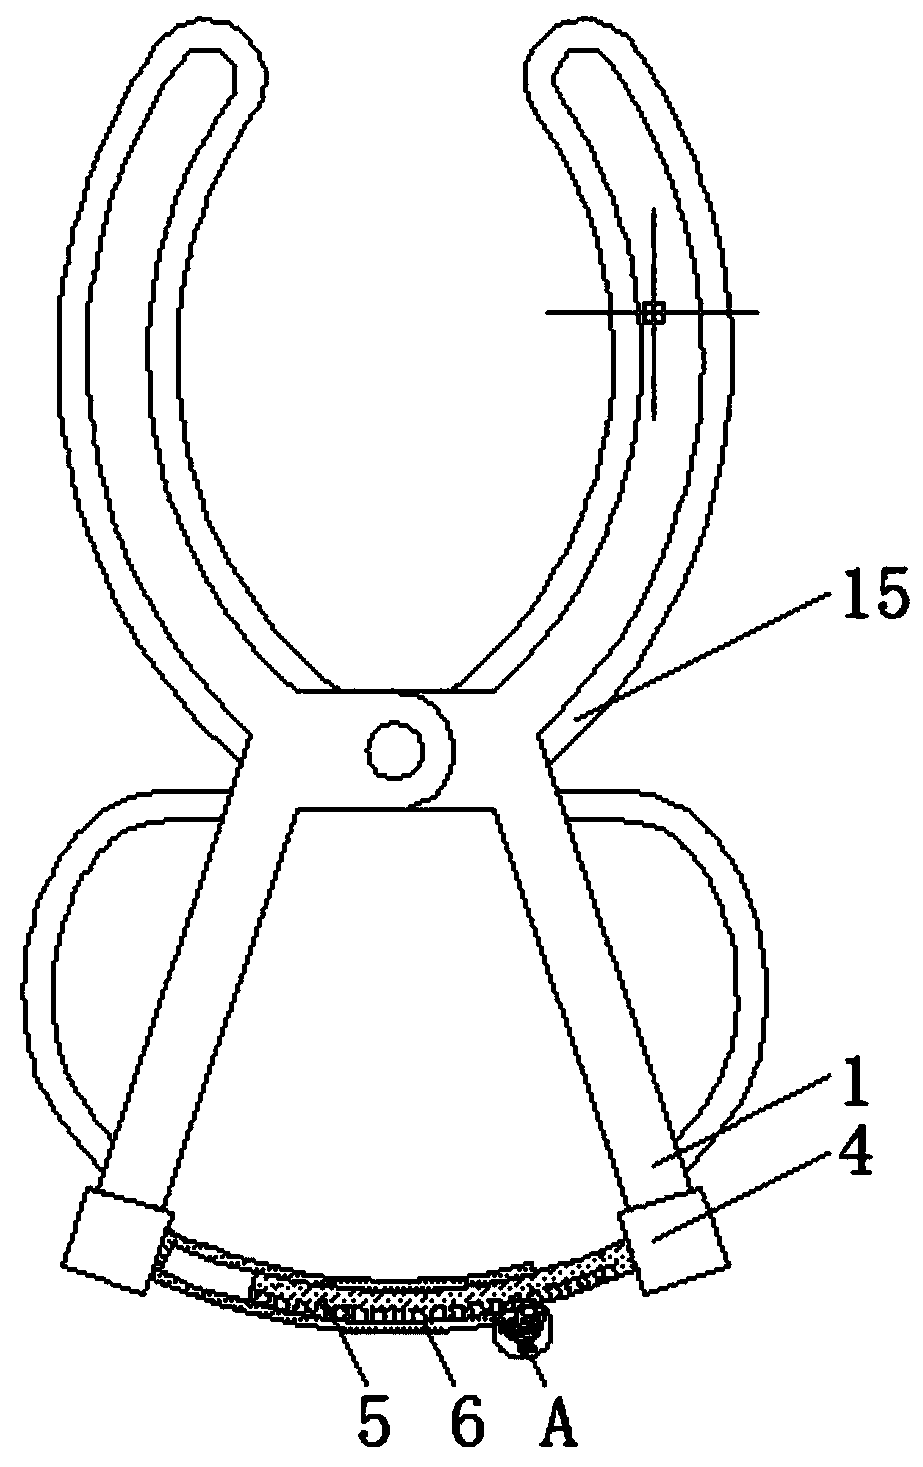 Device for assisting obstetrician in fetal head delivery during clinical cesarean operation